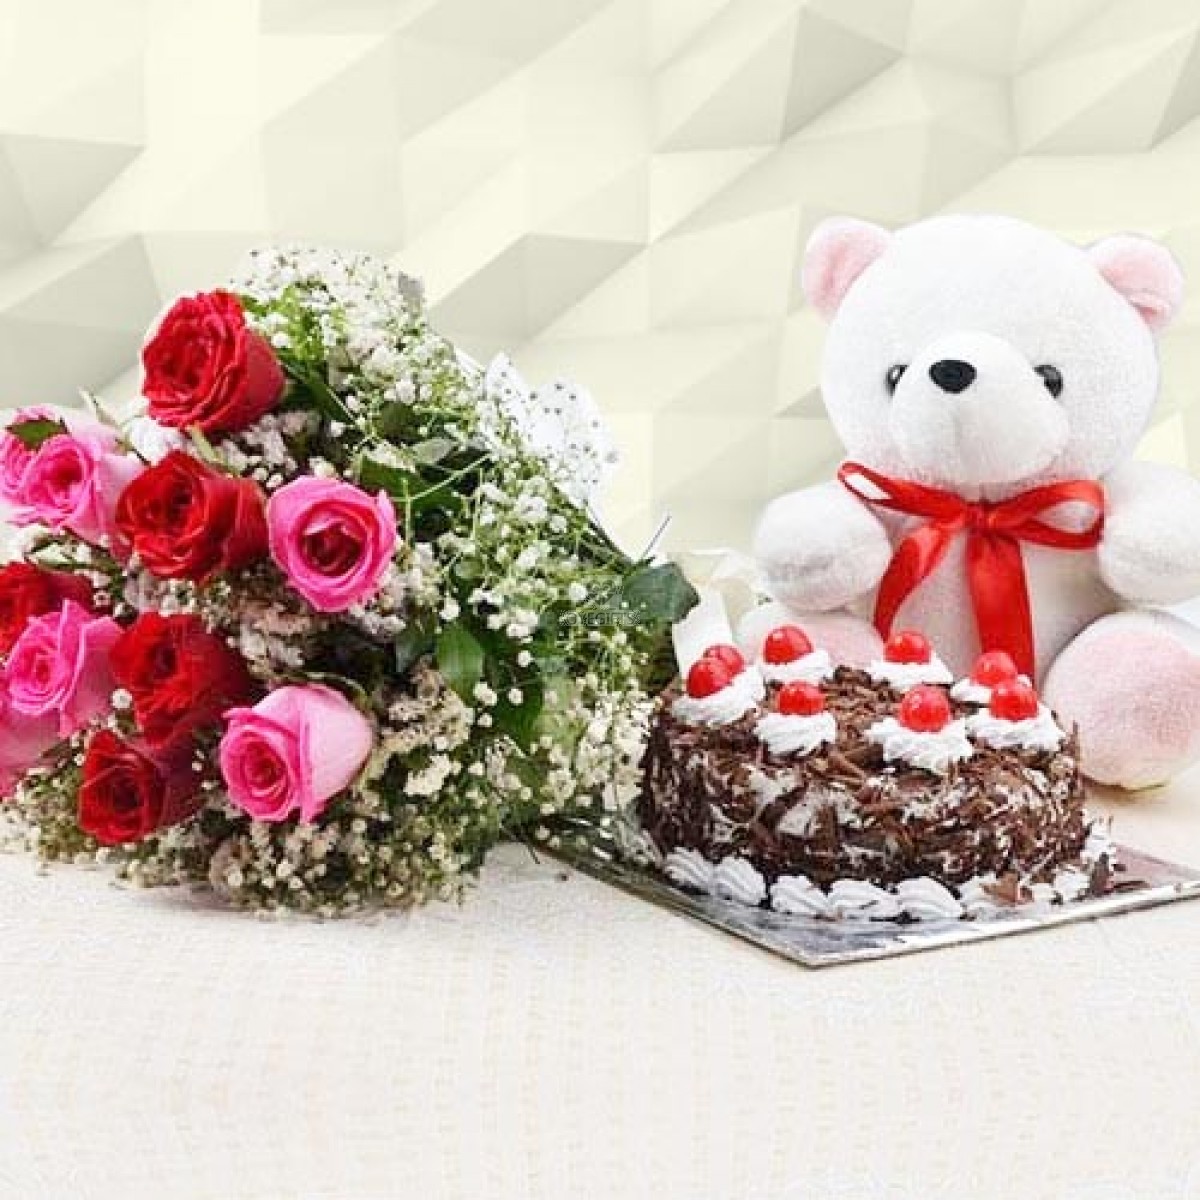 Mix Roses Bunch & Cake With Teddy